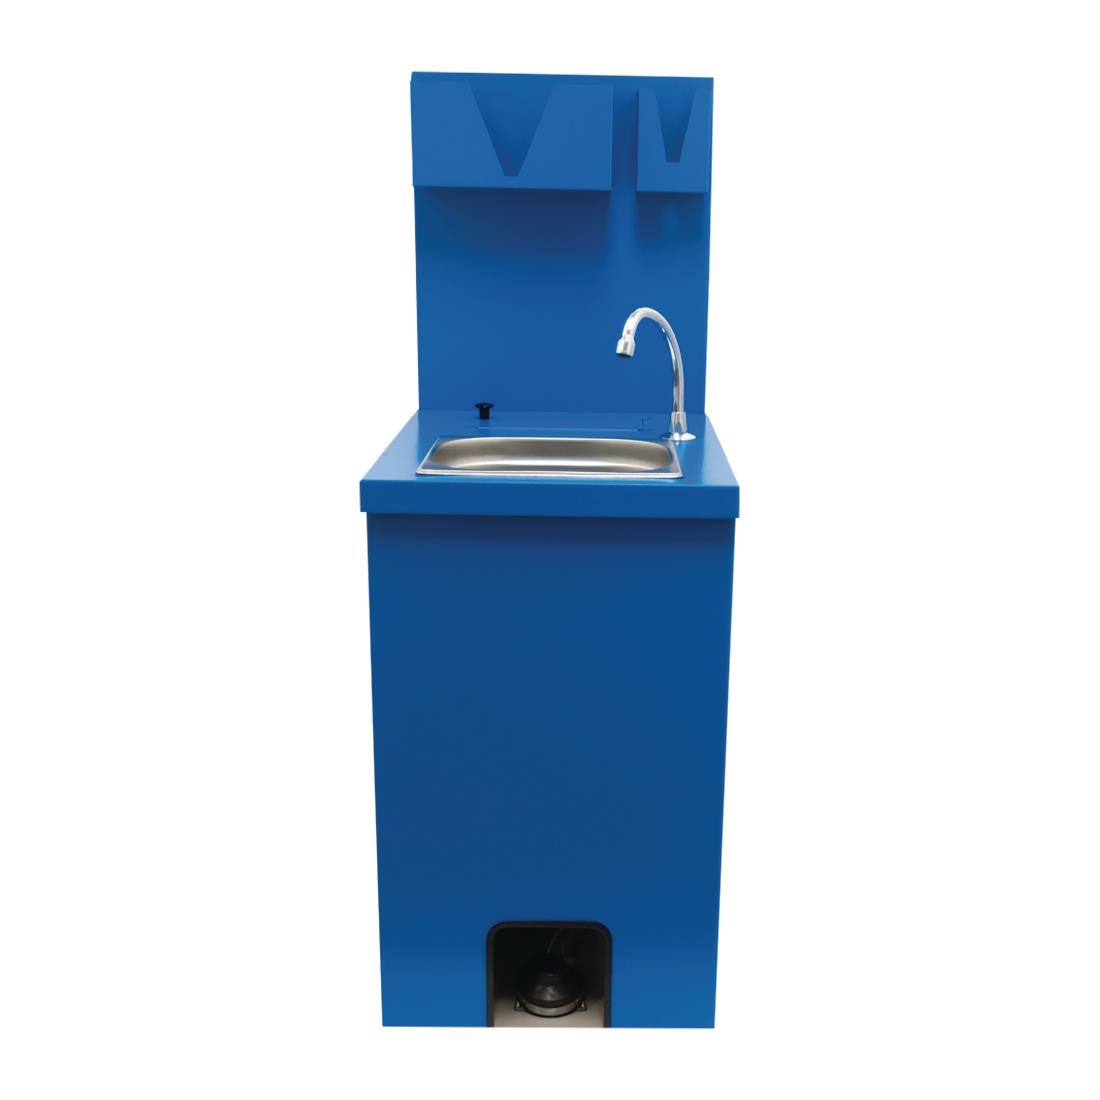 Parry Low Height Cold Hand Wash Basin with Accessories MWBTLCA